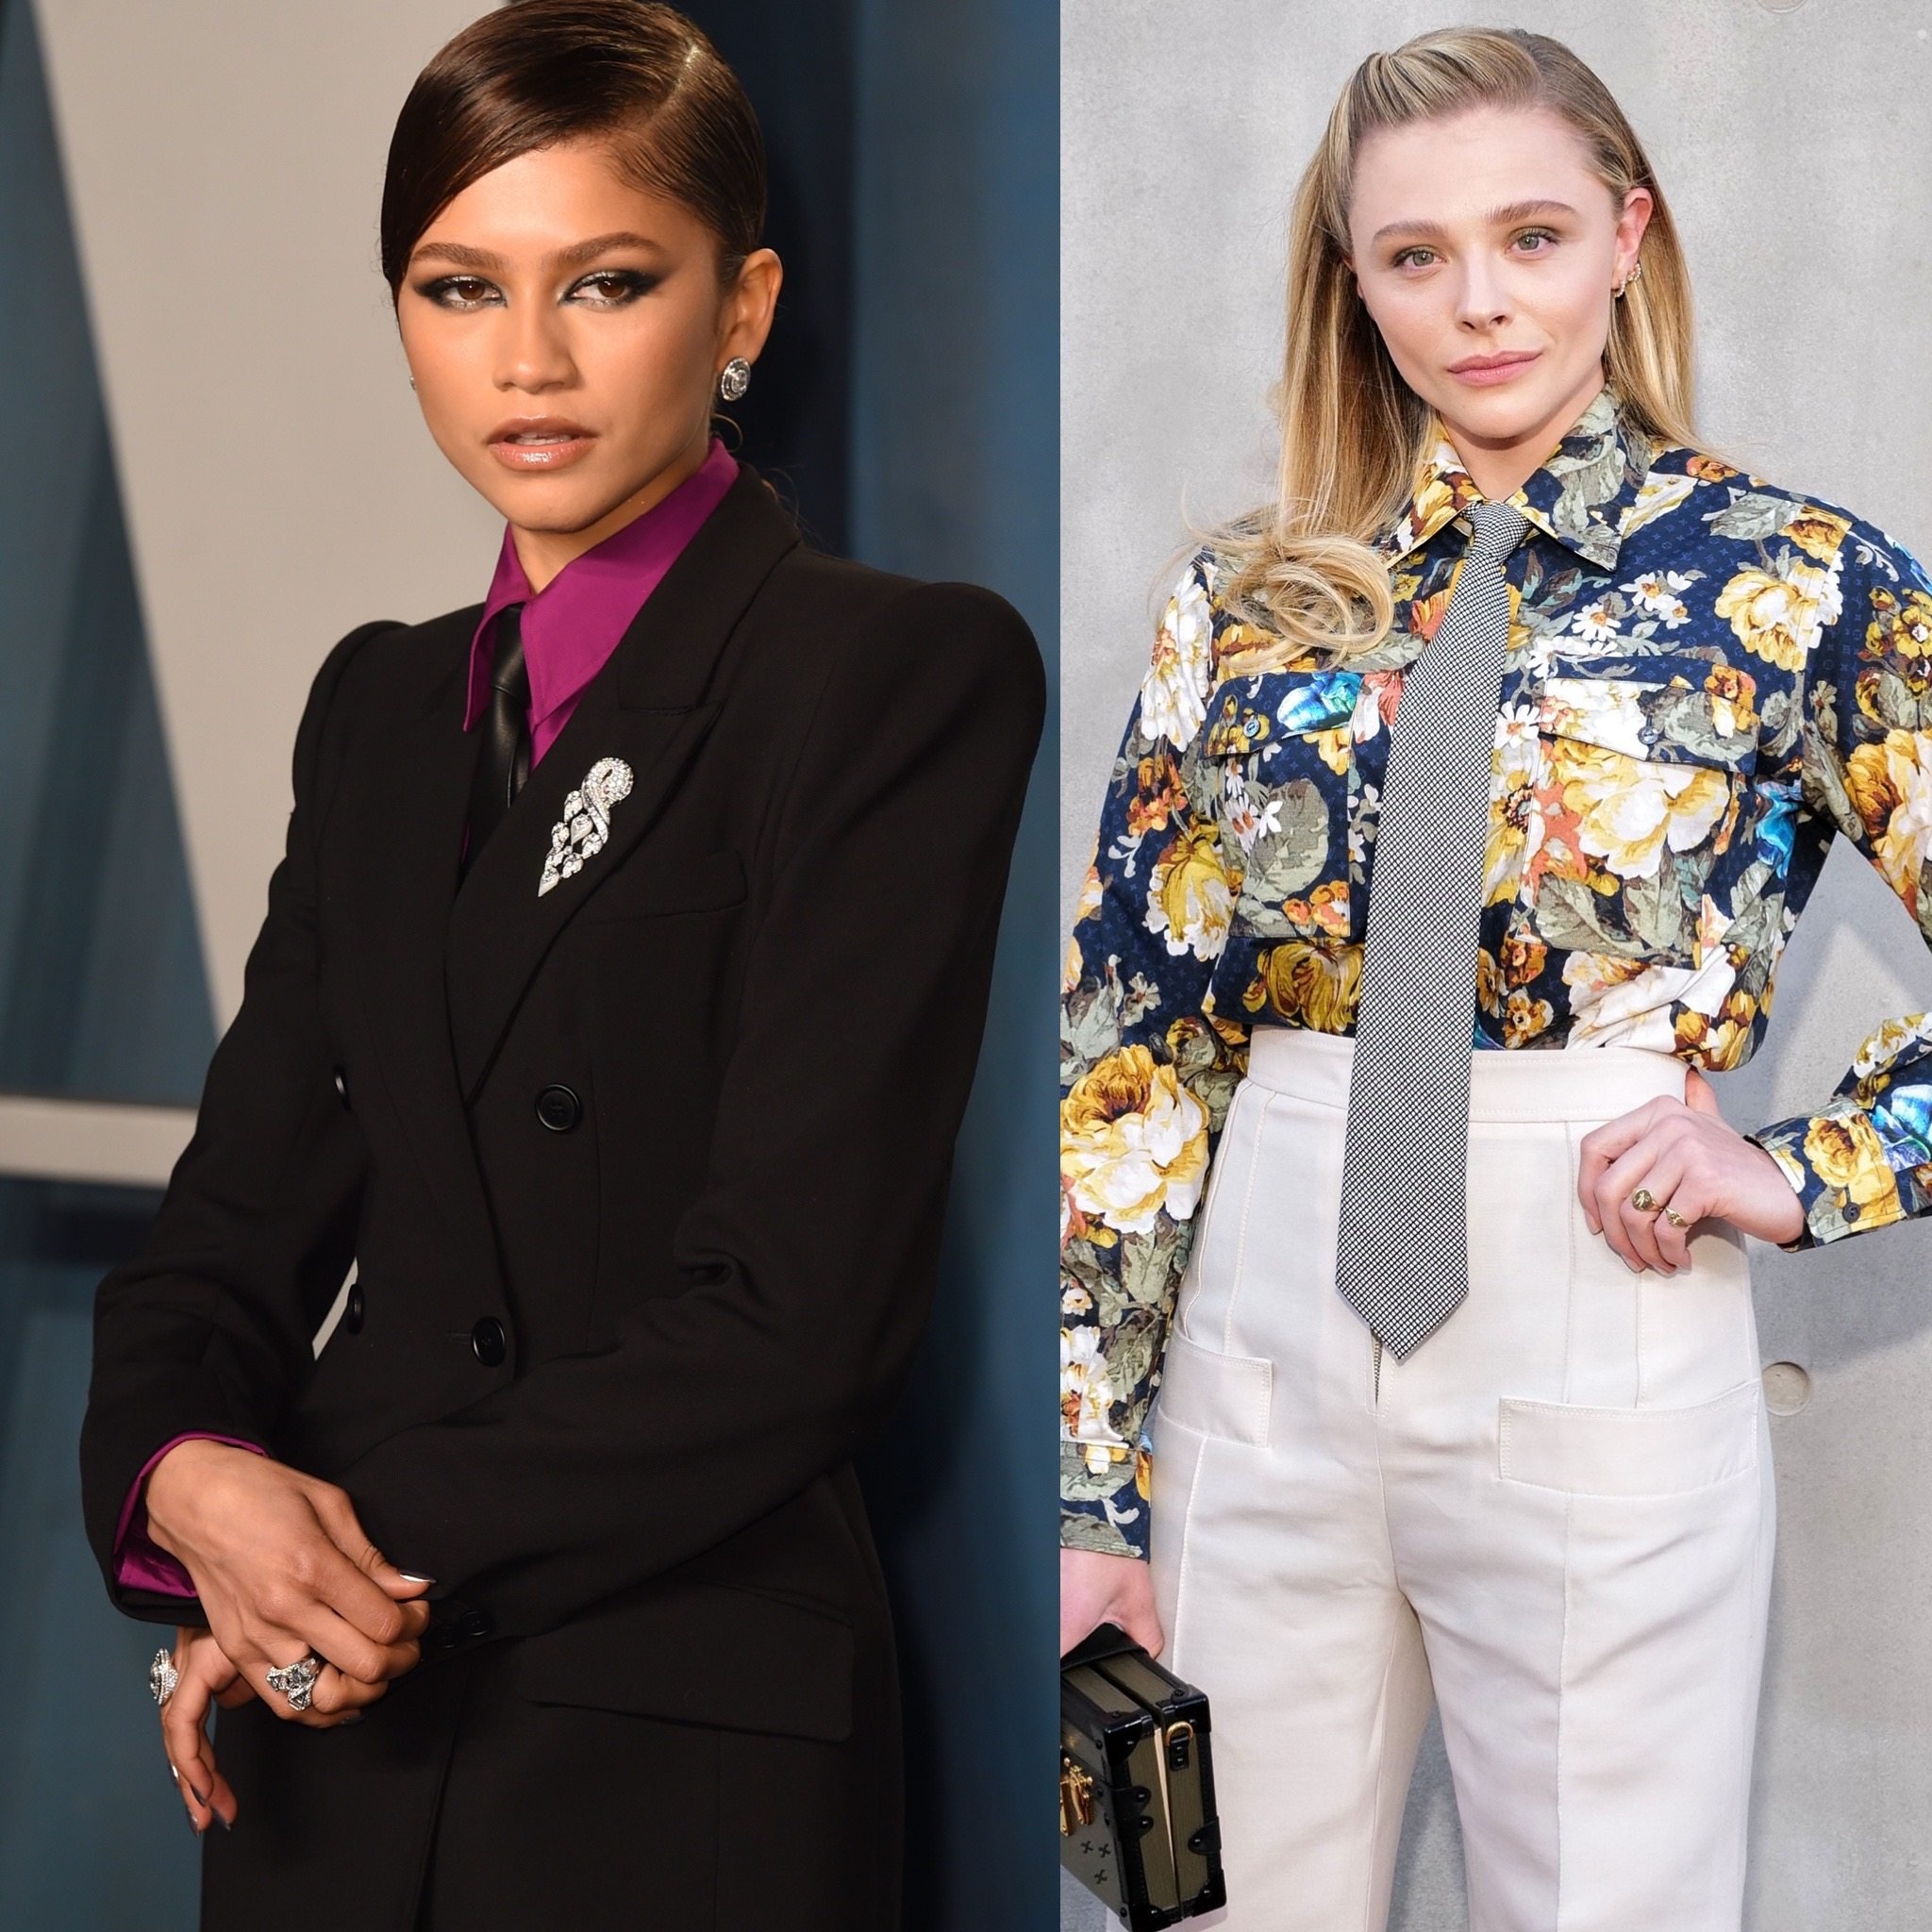 While men seem to be ditching suits and ties, a lot of stylish women are wearing them these days, including actresses Zendaya (left) and Chloe Grace Moretz. Photo: Getty Images